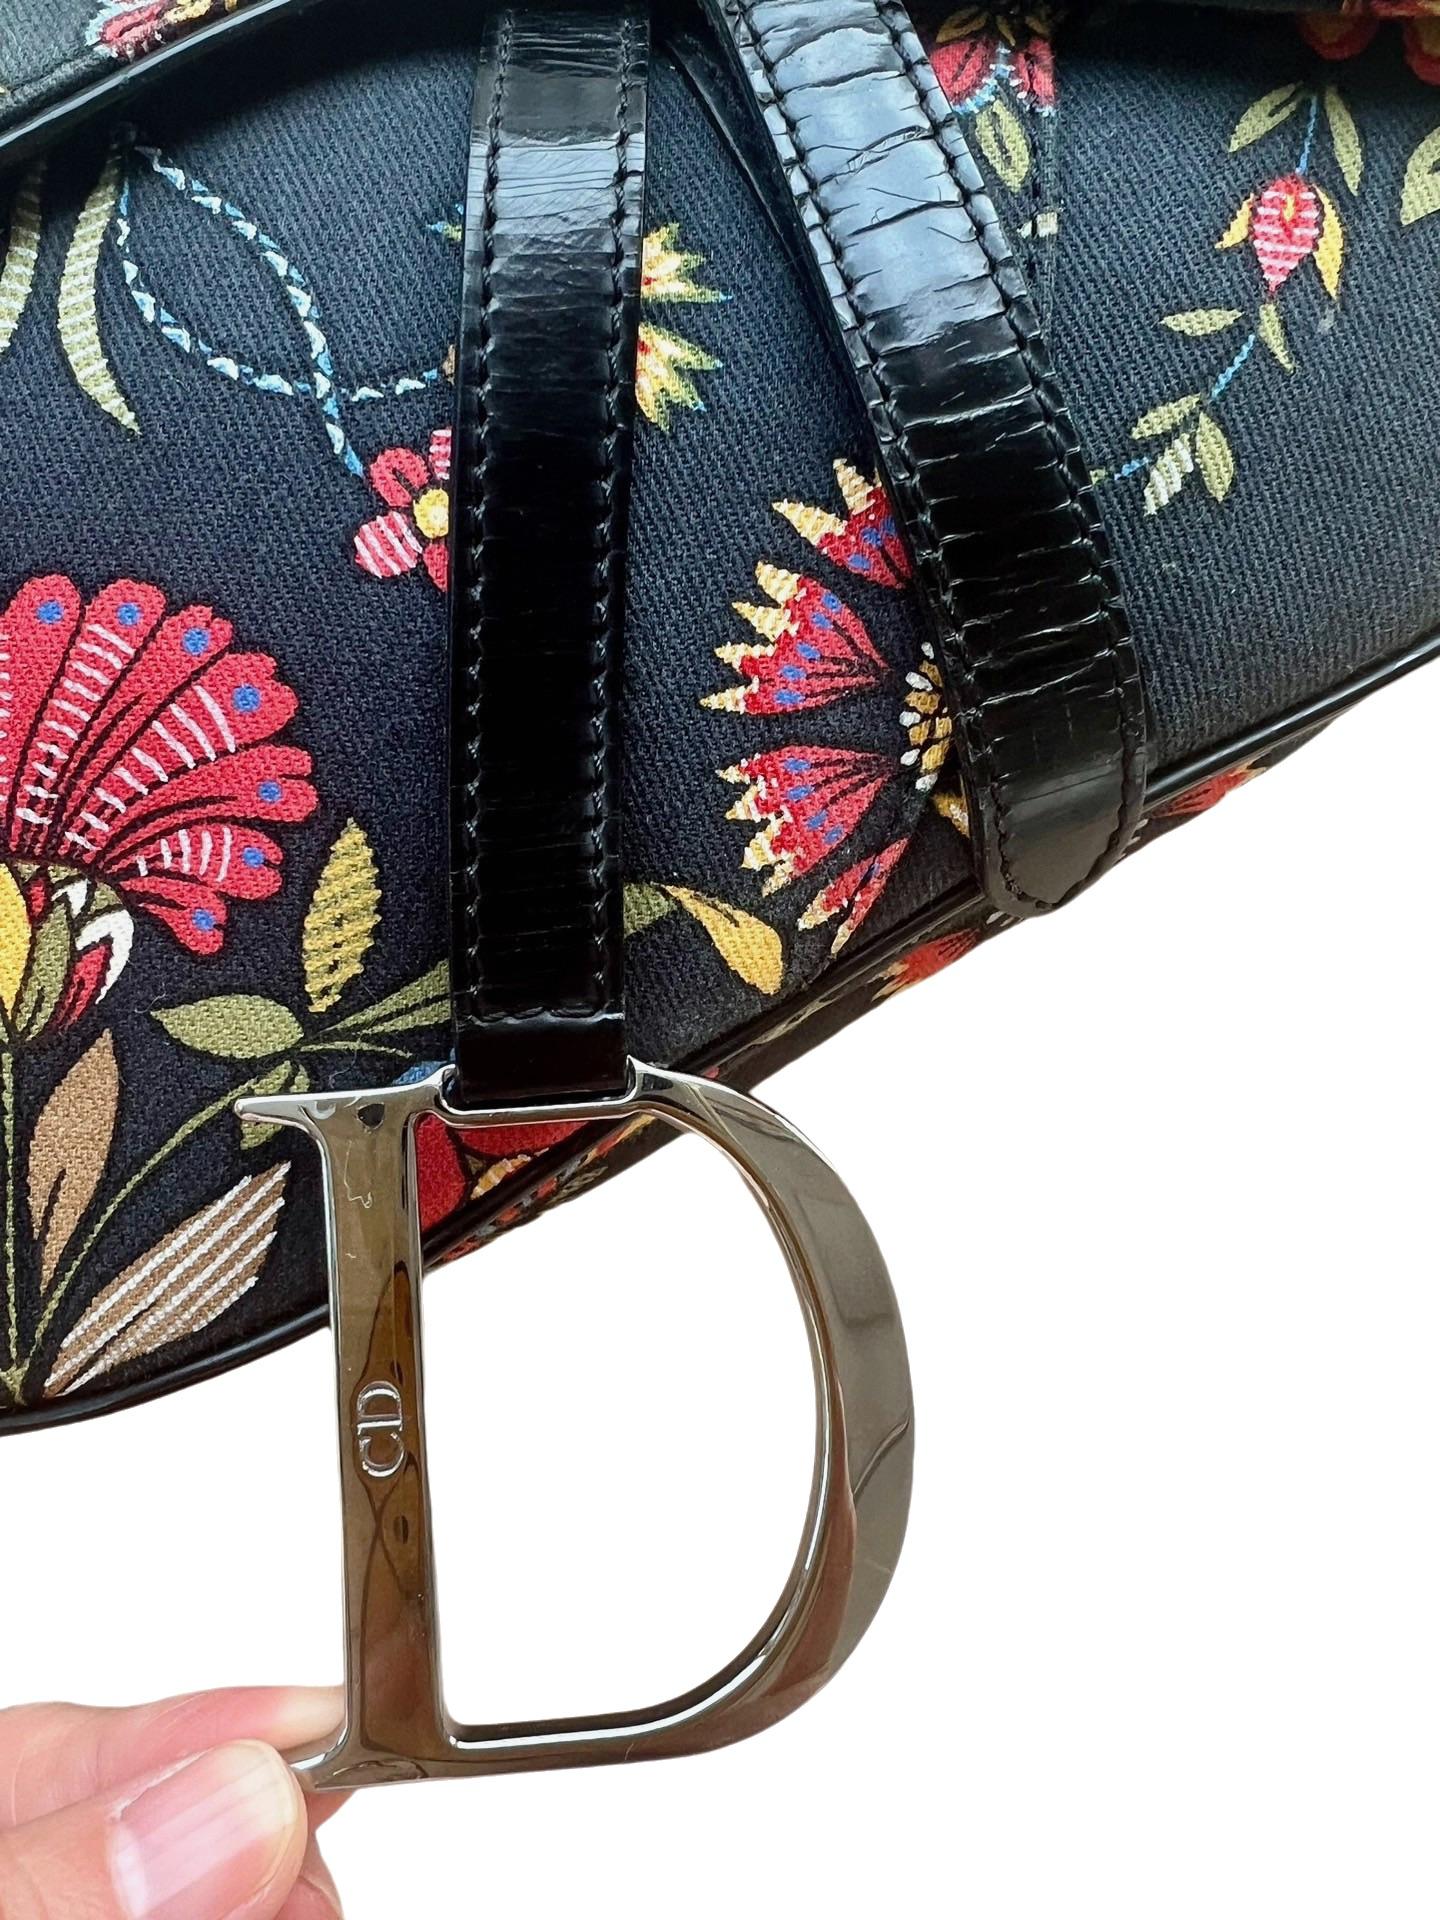 Dior Saddle Black Denim with Floral Embroidery John Galliano Design In Excellent Condition For Sale In AUBERVILLIERS, FR